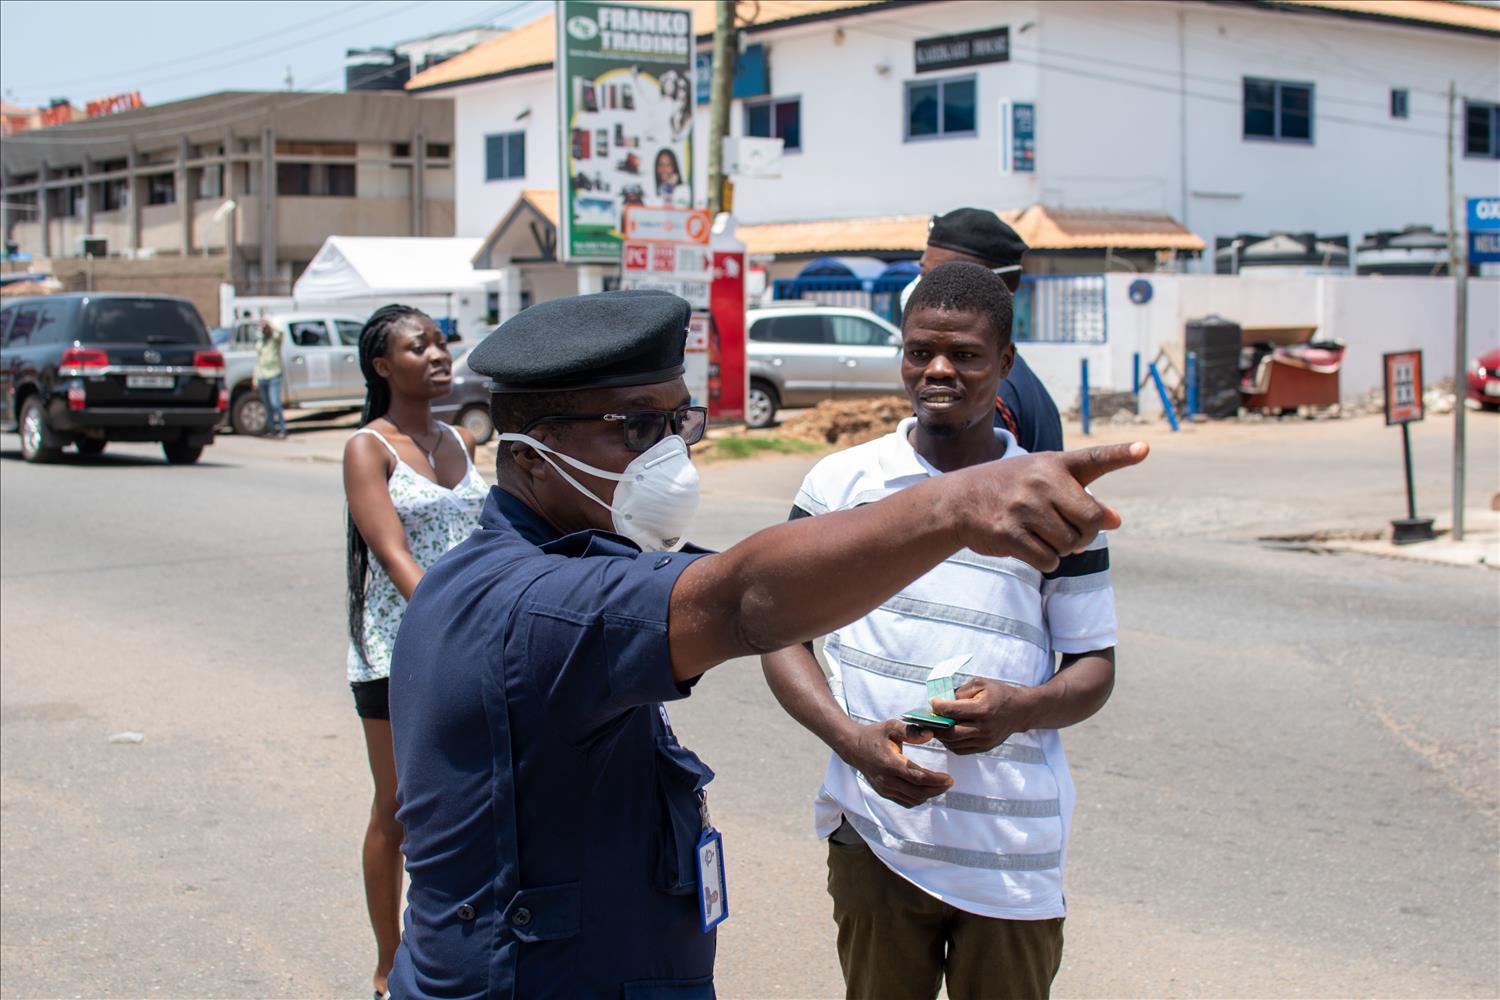 Ghana's COVID Lockdown: Why It Triggered A Toxic Mix Of Mass Defiance And Police Violence